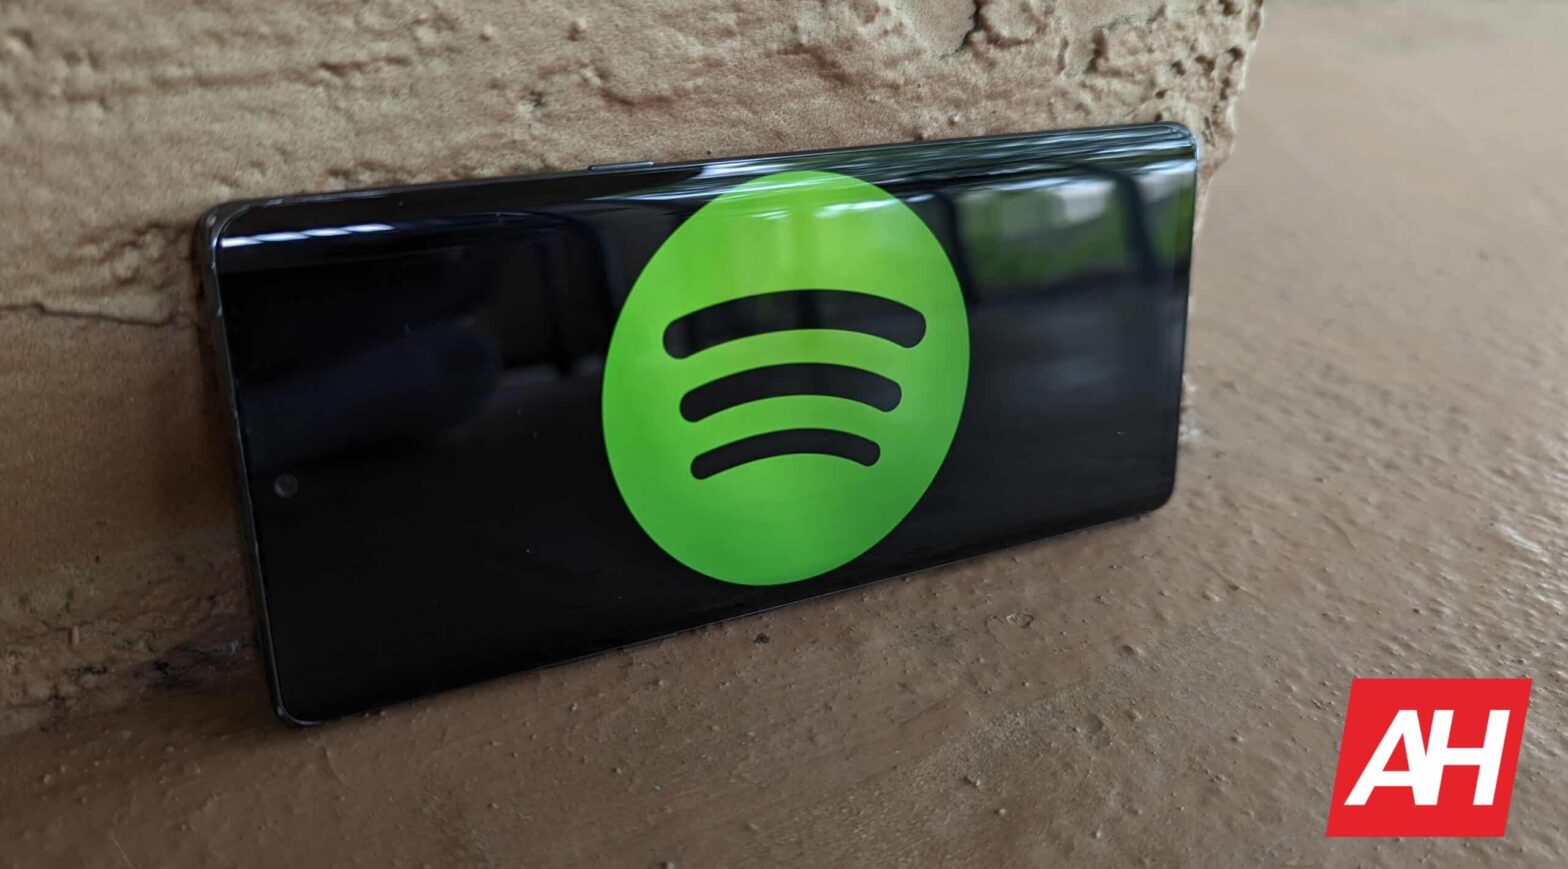 Spotify will make sharing music a bit more mysterious